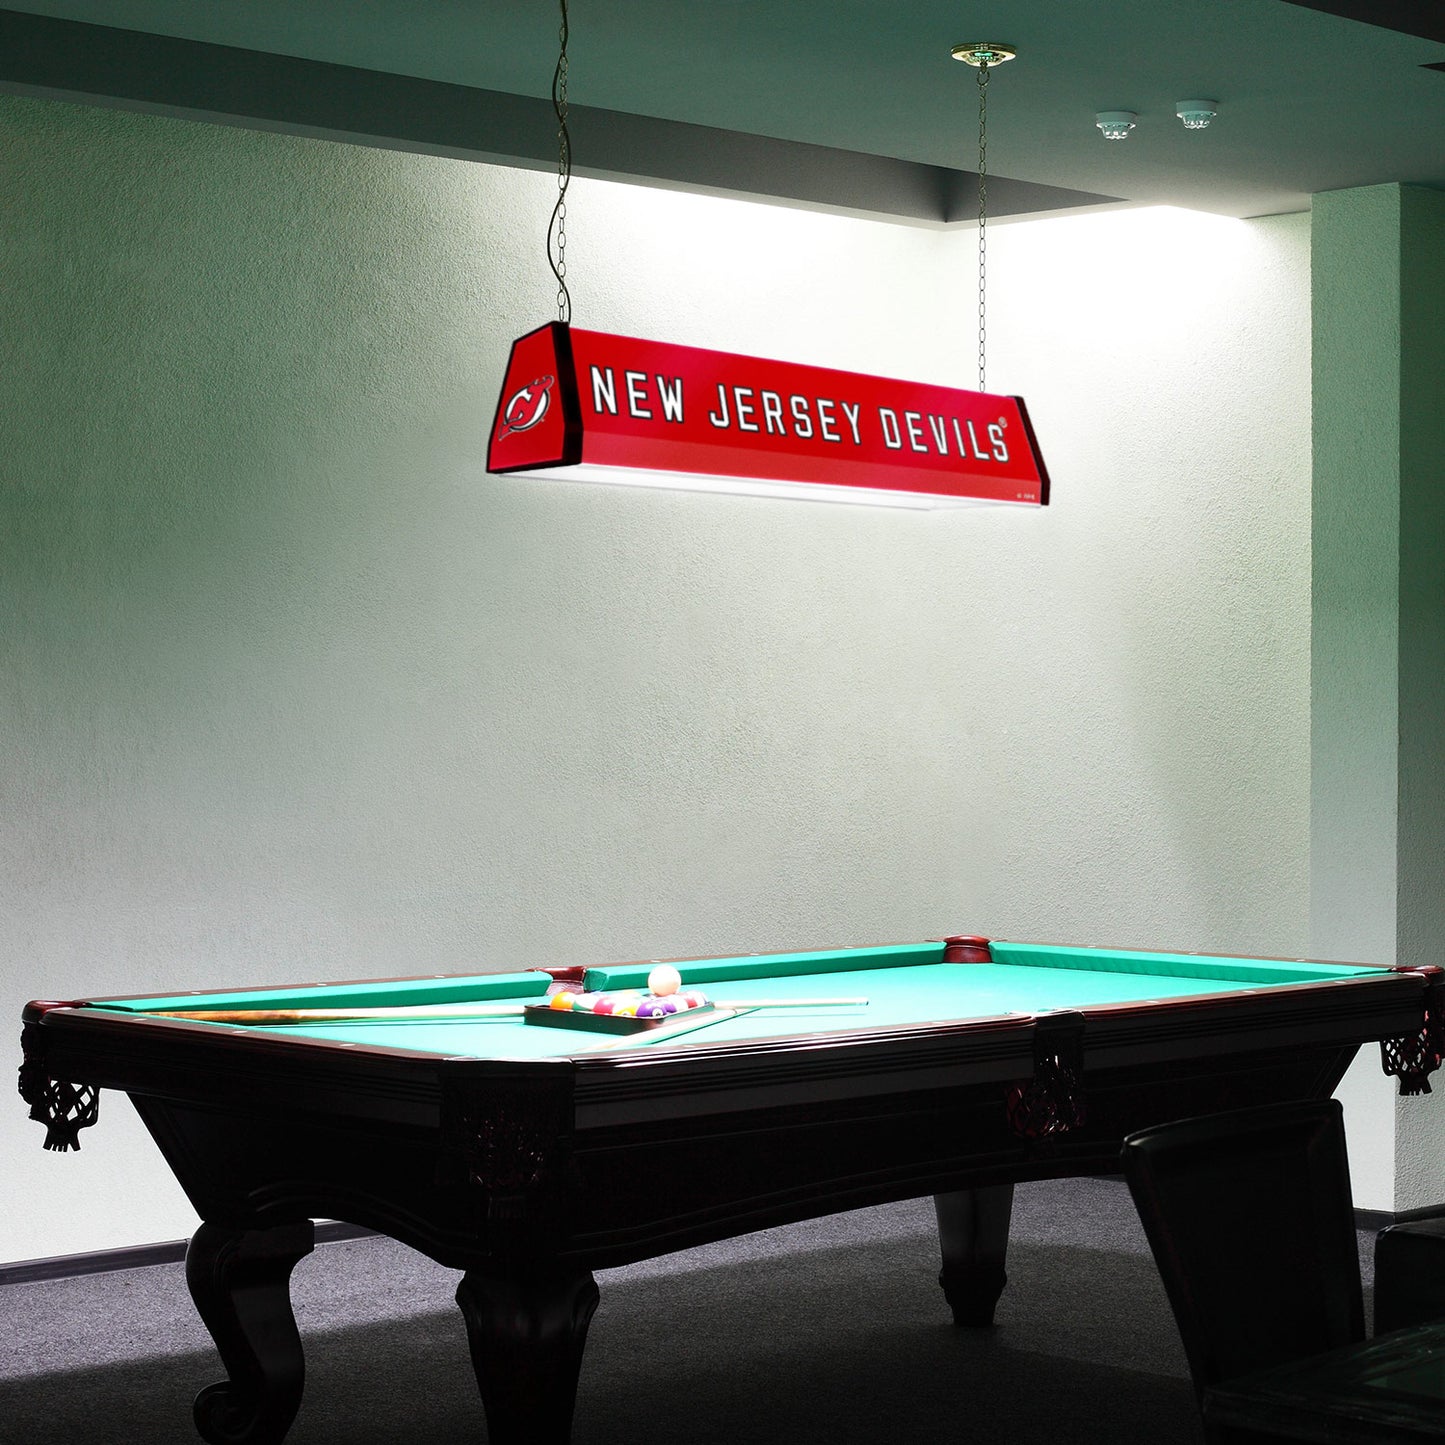 New Jersey Devils Standard Pool Table Light Room View